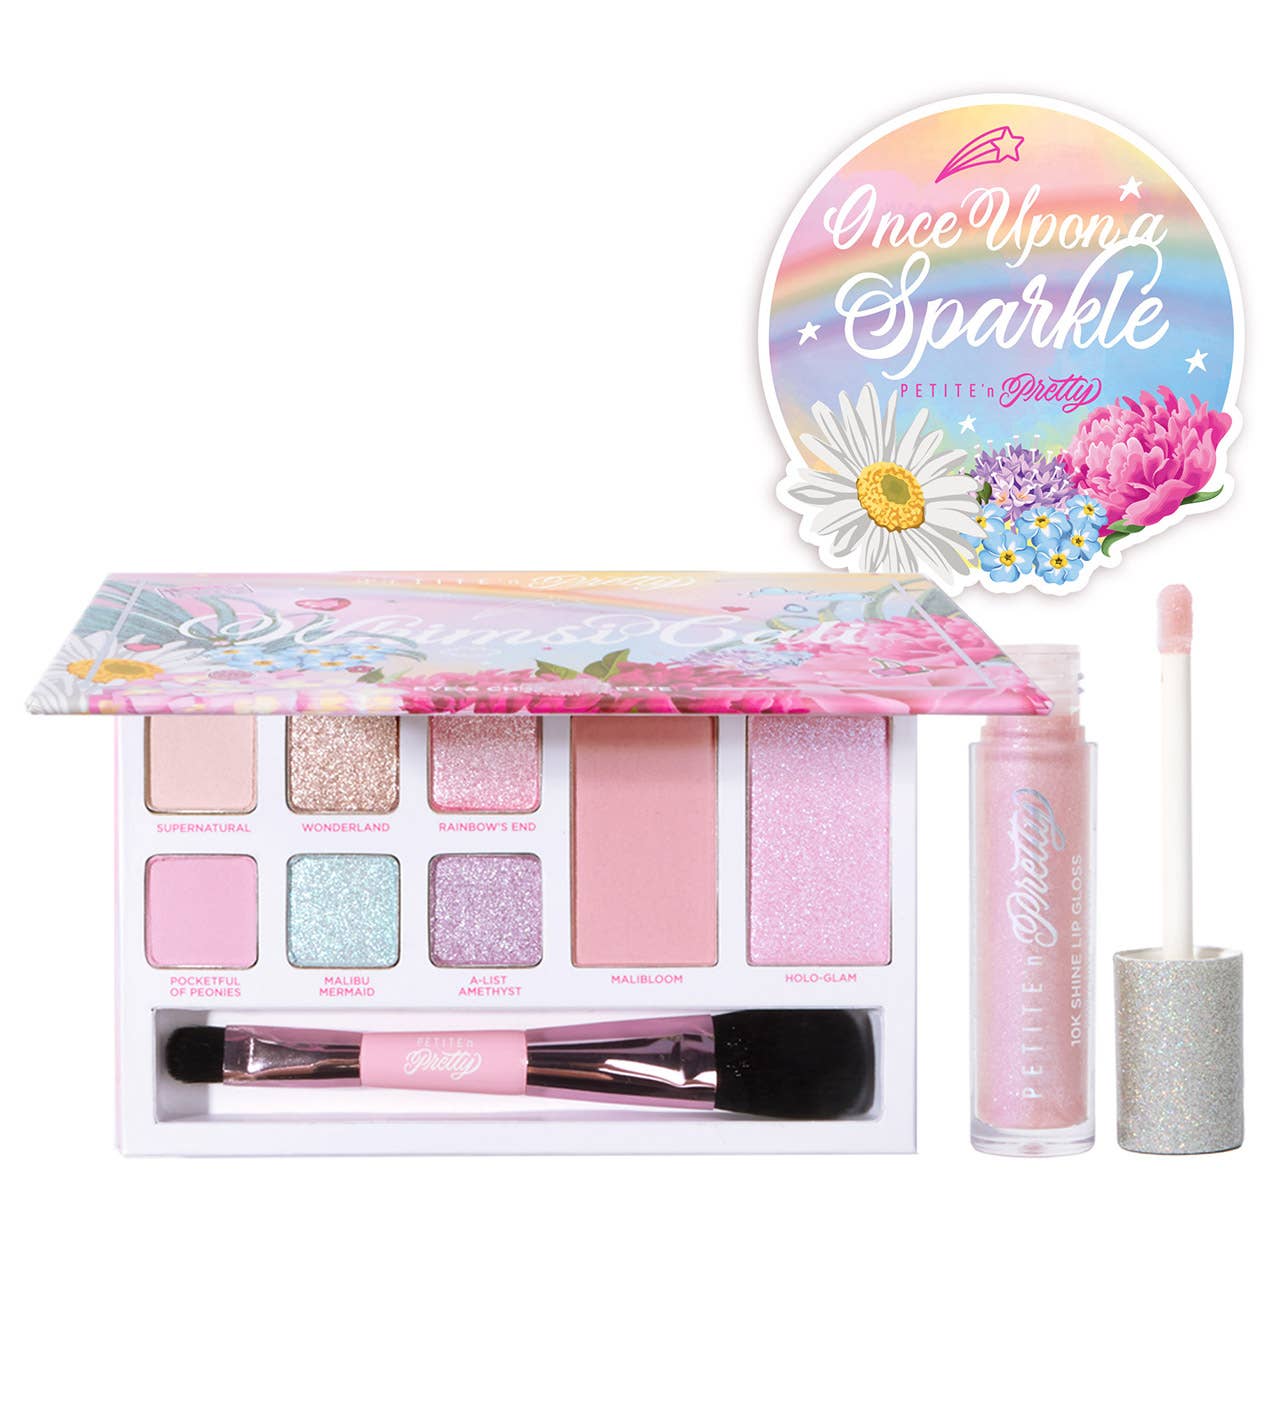 Petite 'n Pretty Sparkly Ever After Starter Makeup Set